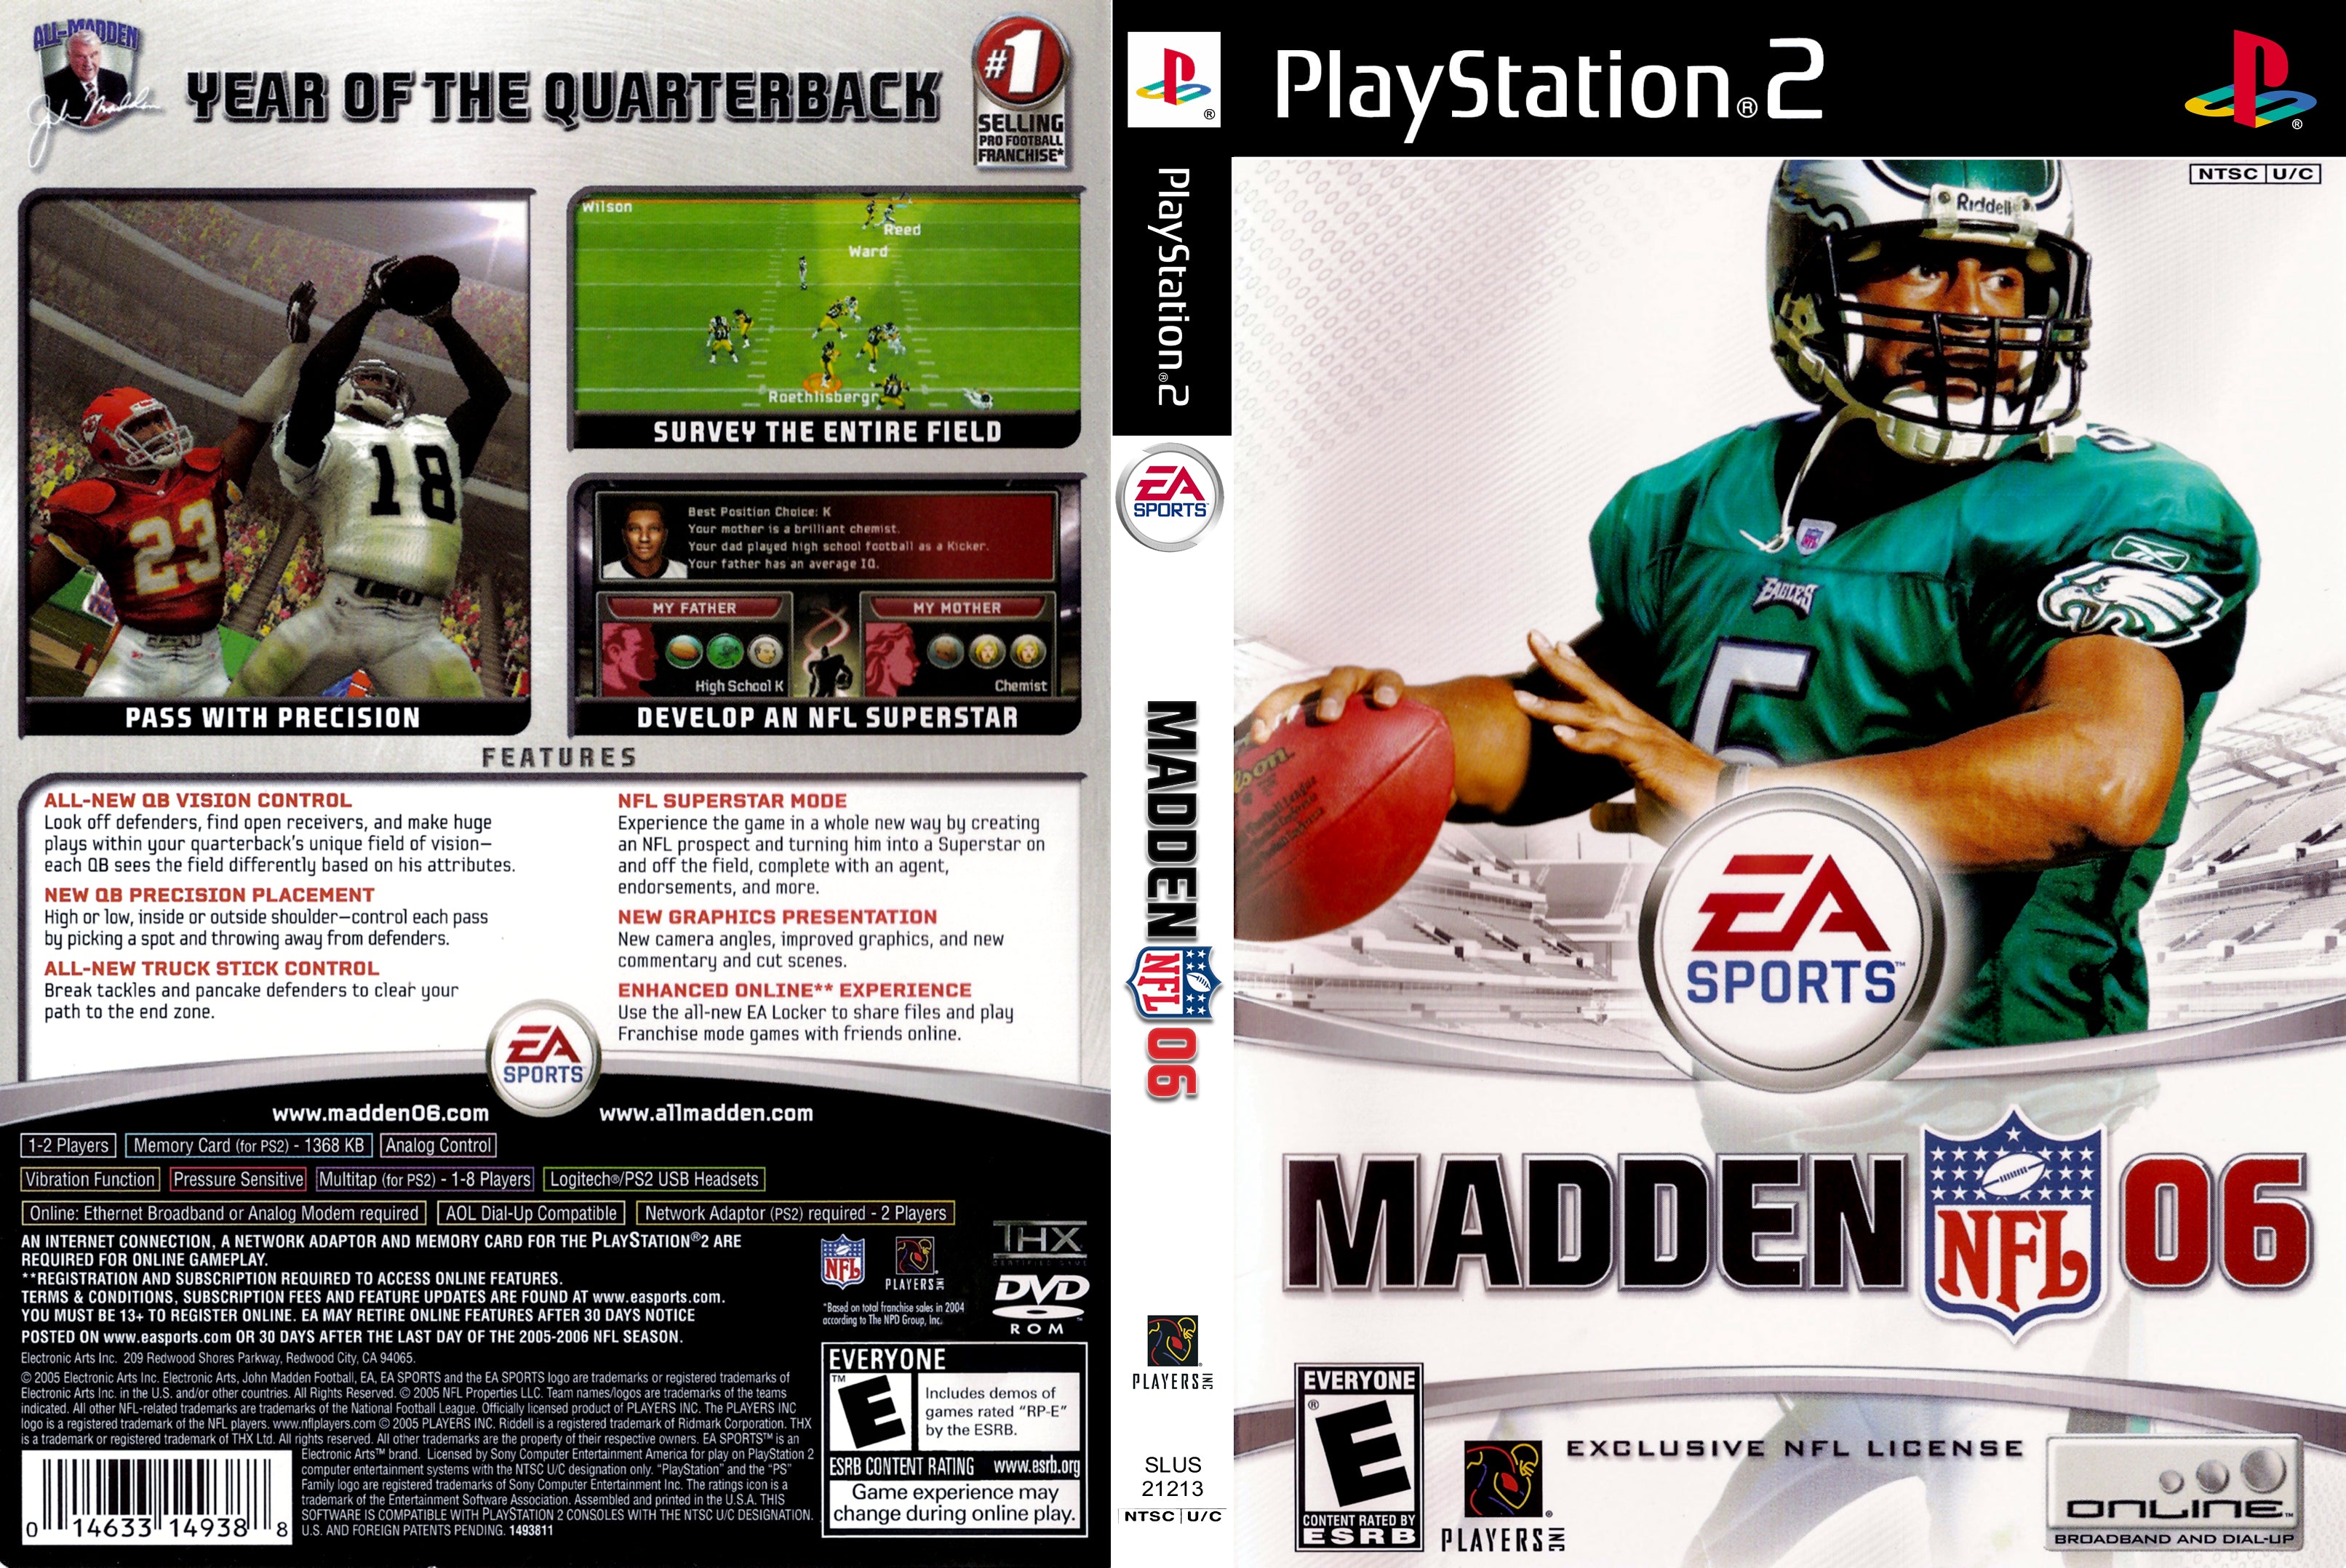 2006 madden cover